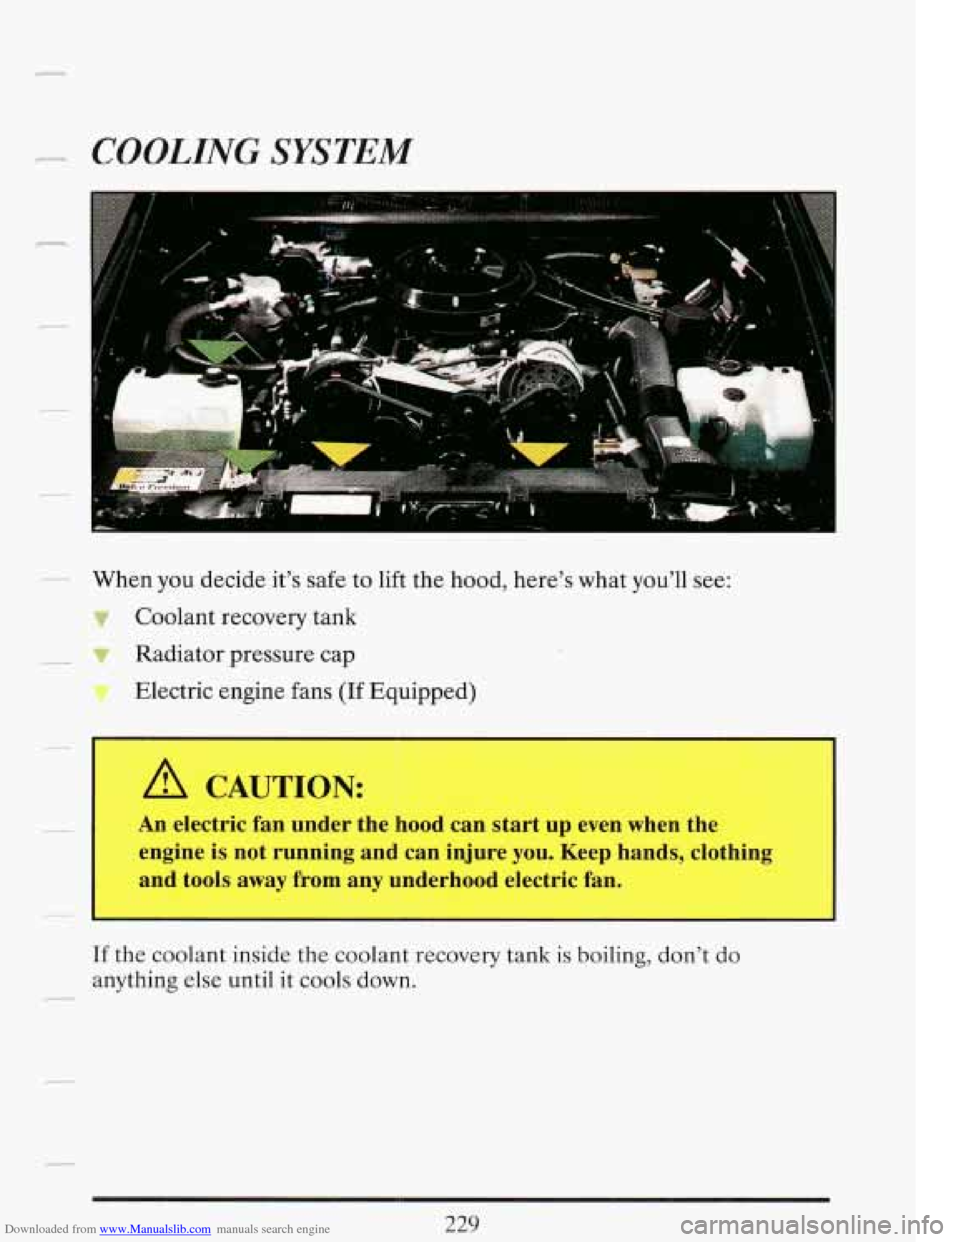 CADILLAC FLEETWOOD 1993 2.G Owners Manual Downloaded from www.Manualslib.com manuals search engine .- COOLING SYSTEM 
-- When you decide  it’s safe  to lift the hood, here’s what  you’ll see: 
Coolant  recovery  tank 
-? Radiator  press